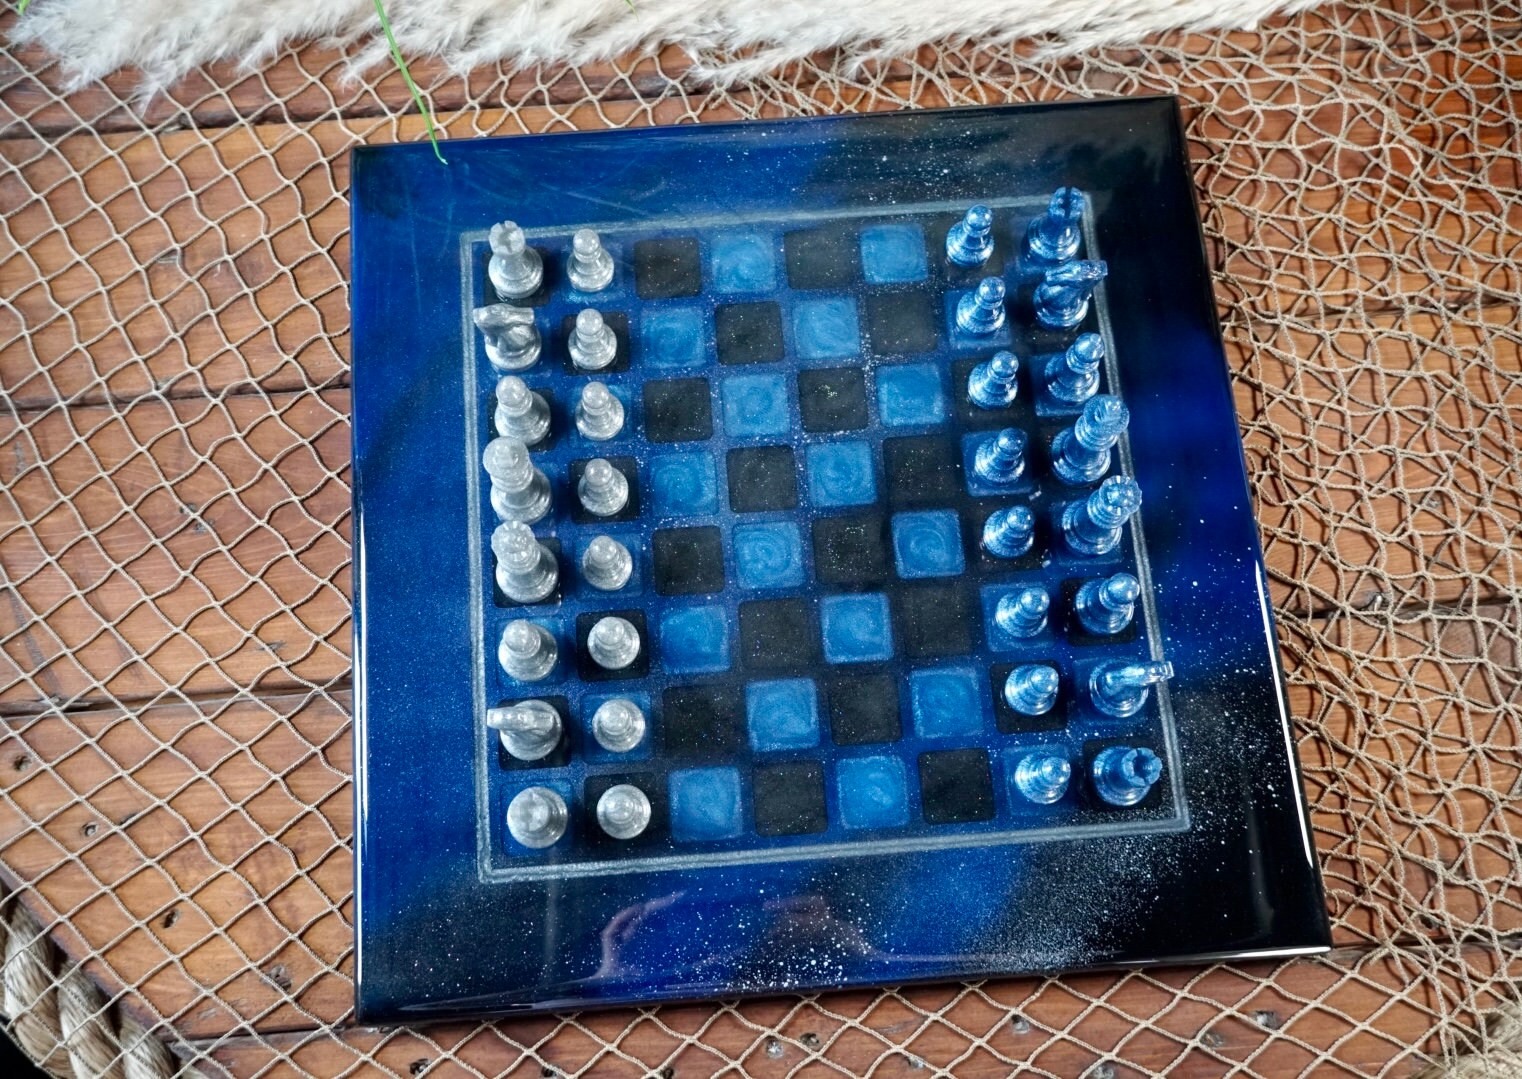 Chess set with Galaxy theme board